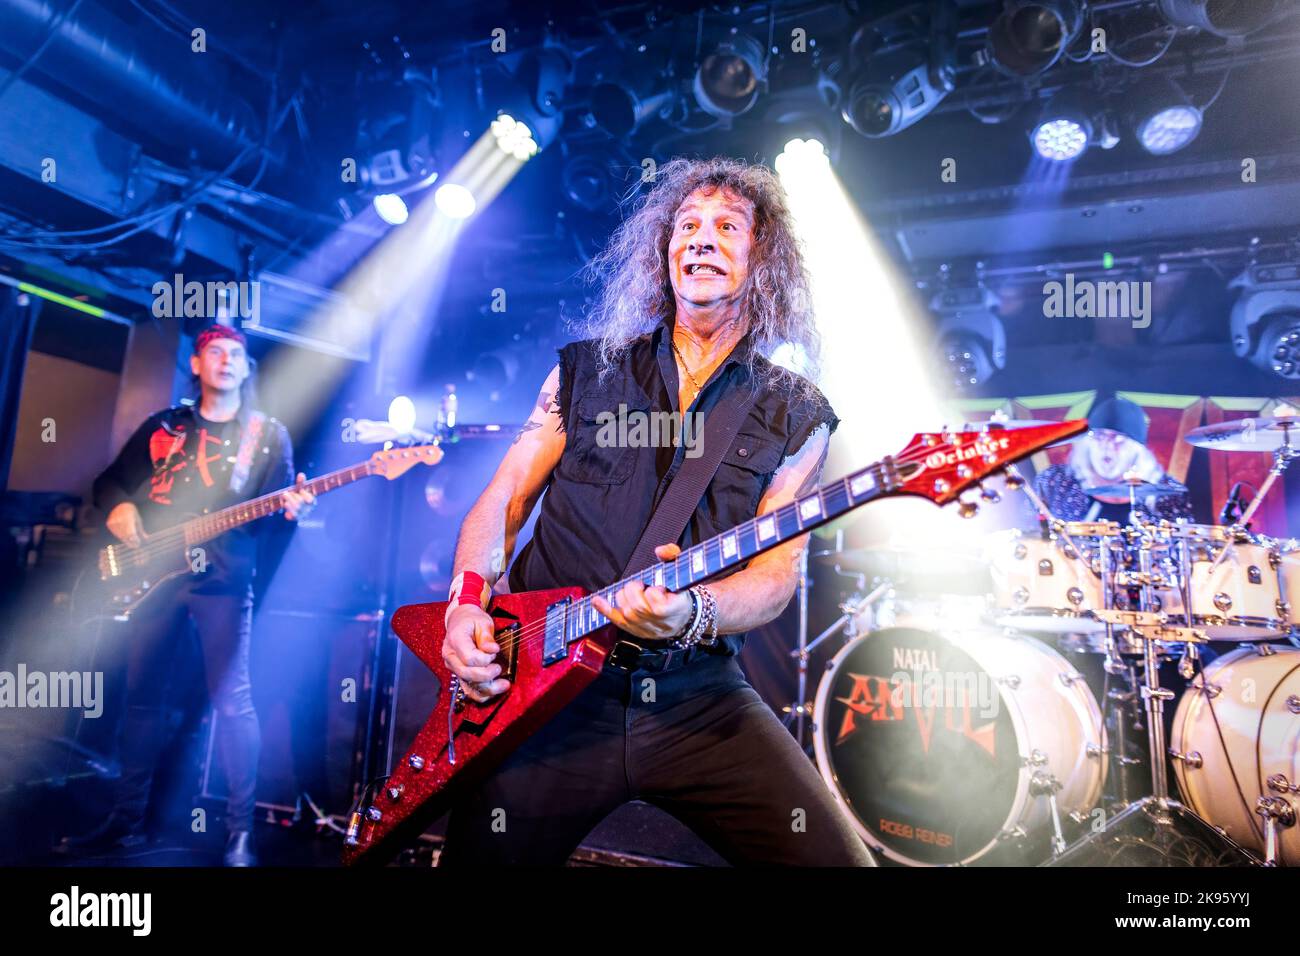 Oslo, Norway. 24th, October 2022. The Canadian heavy metal band Anvil performs a live concert at John Dee in Oslo. Here vocalist and guitarist Steve Kudlow a.k.a. Lips is seen live on stage. (Photo credit: Gonzales Photo - Terje Dokken). Stock Photo